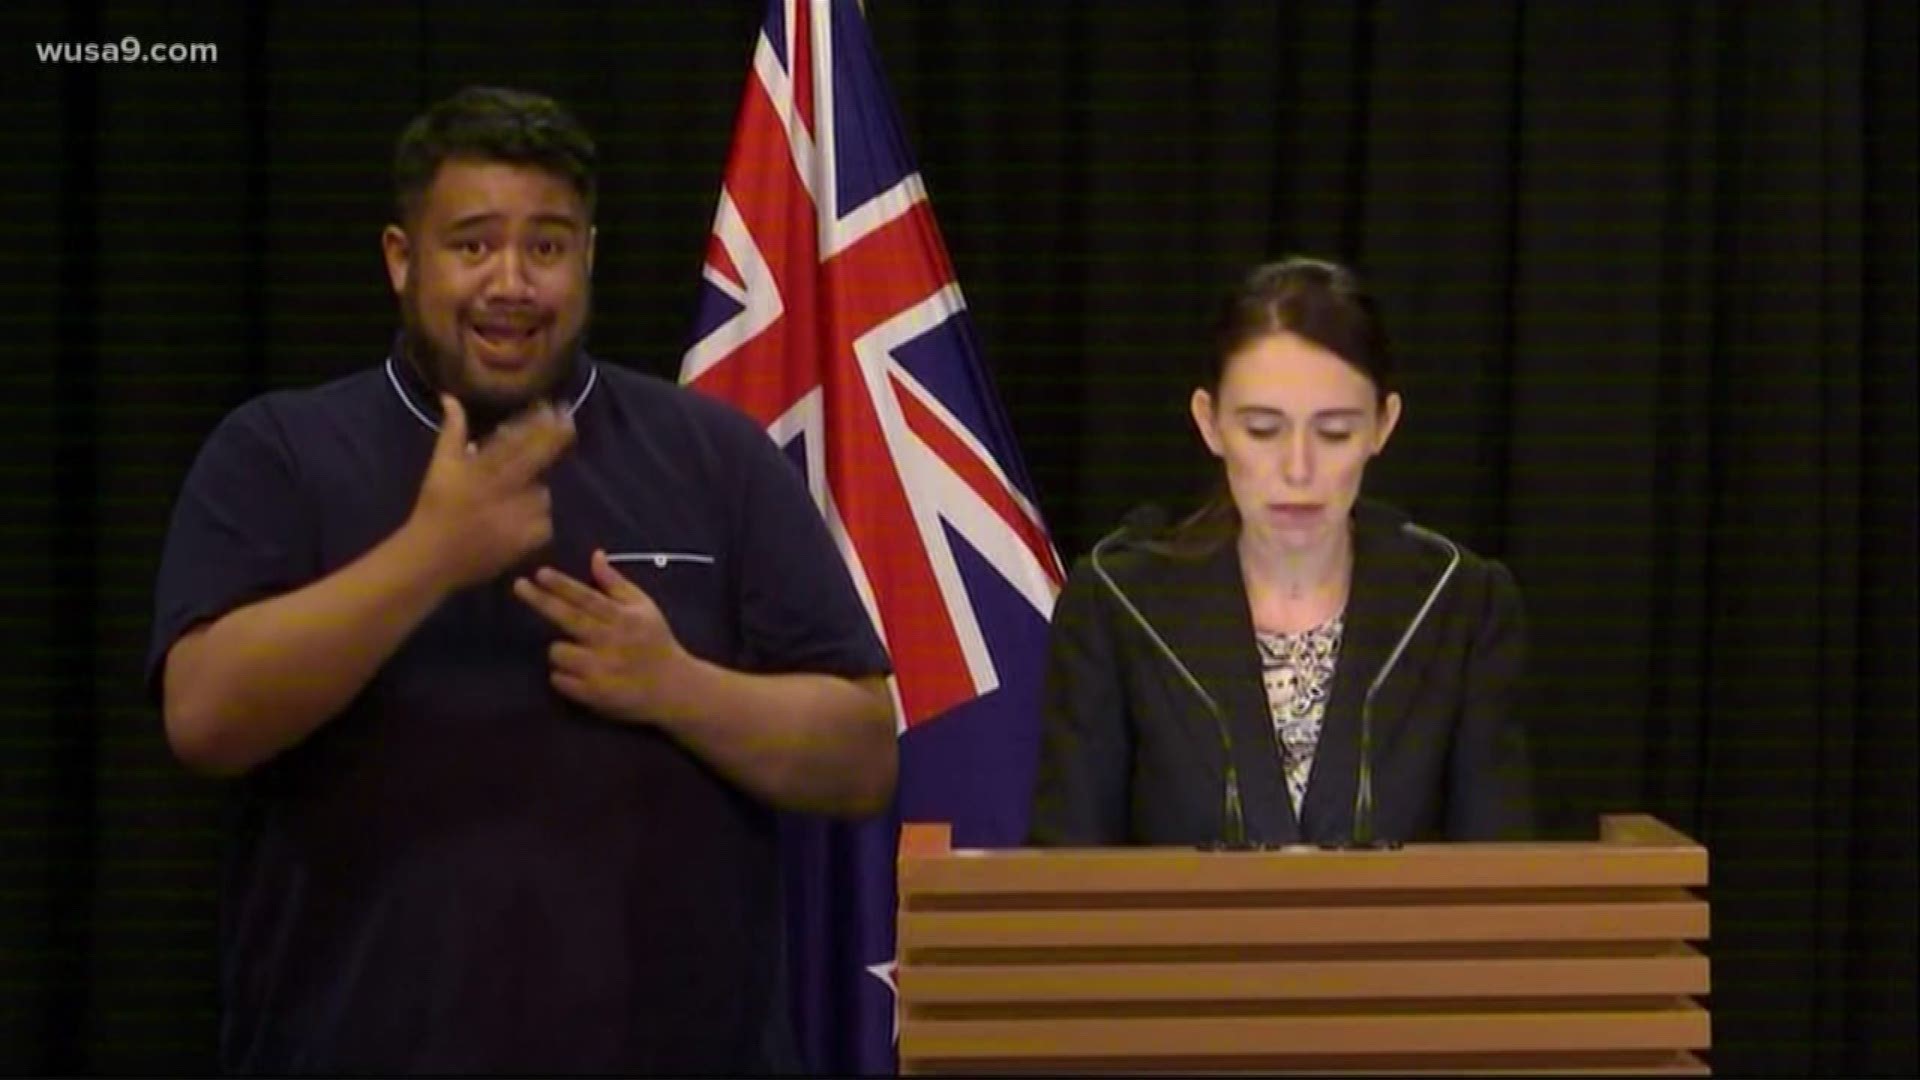 Prime Minister Jacinda Ardern announced an immediate ban Thursday on semi-automatic and automatic weapons like the ones used in the attacks on two mosques in Christchurch that killed 50 worshippers.